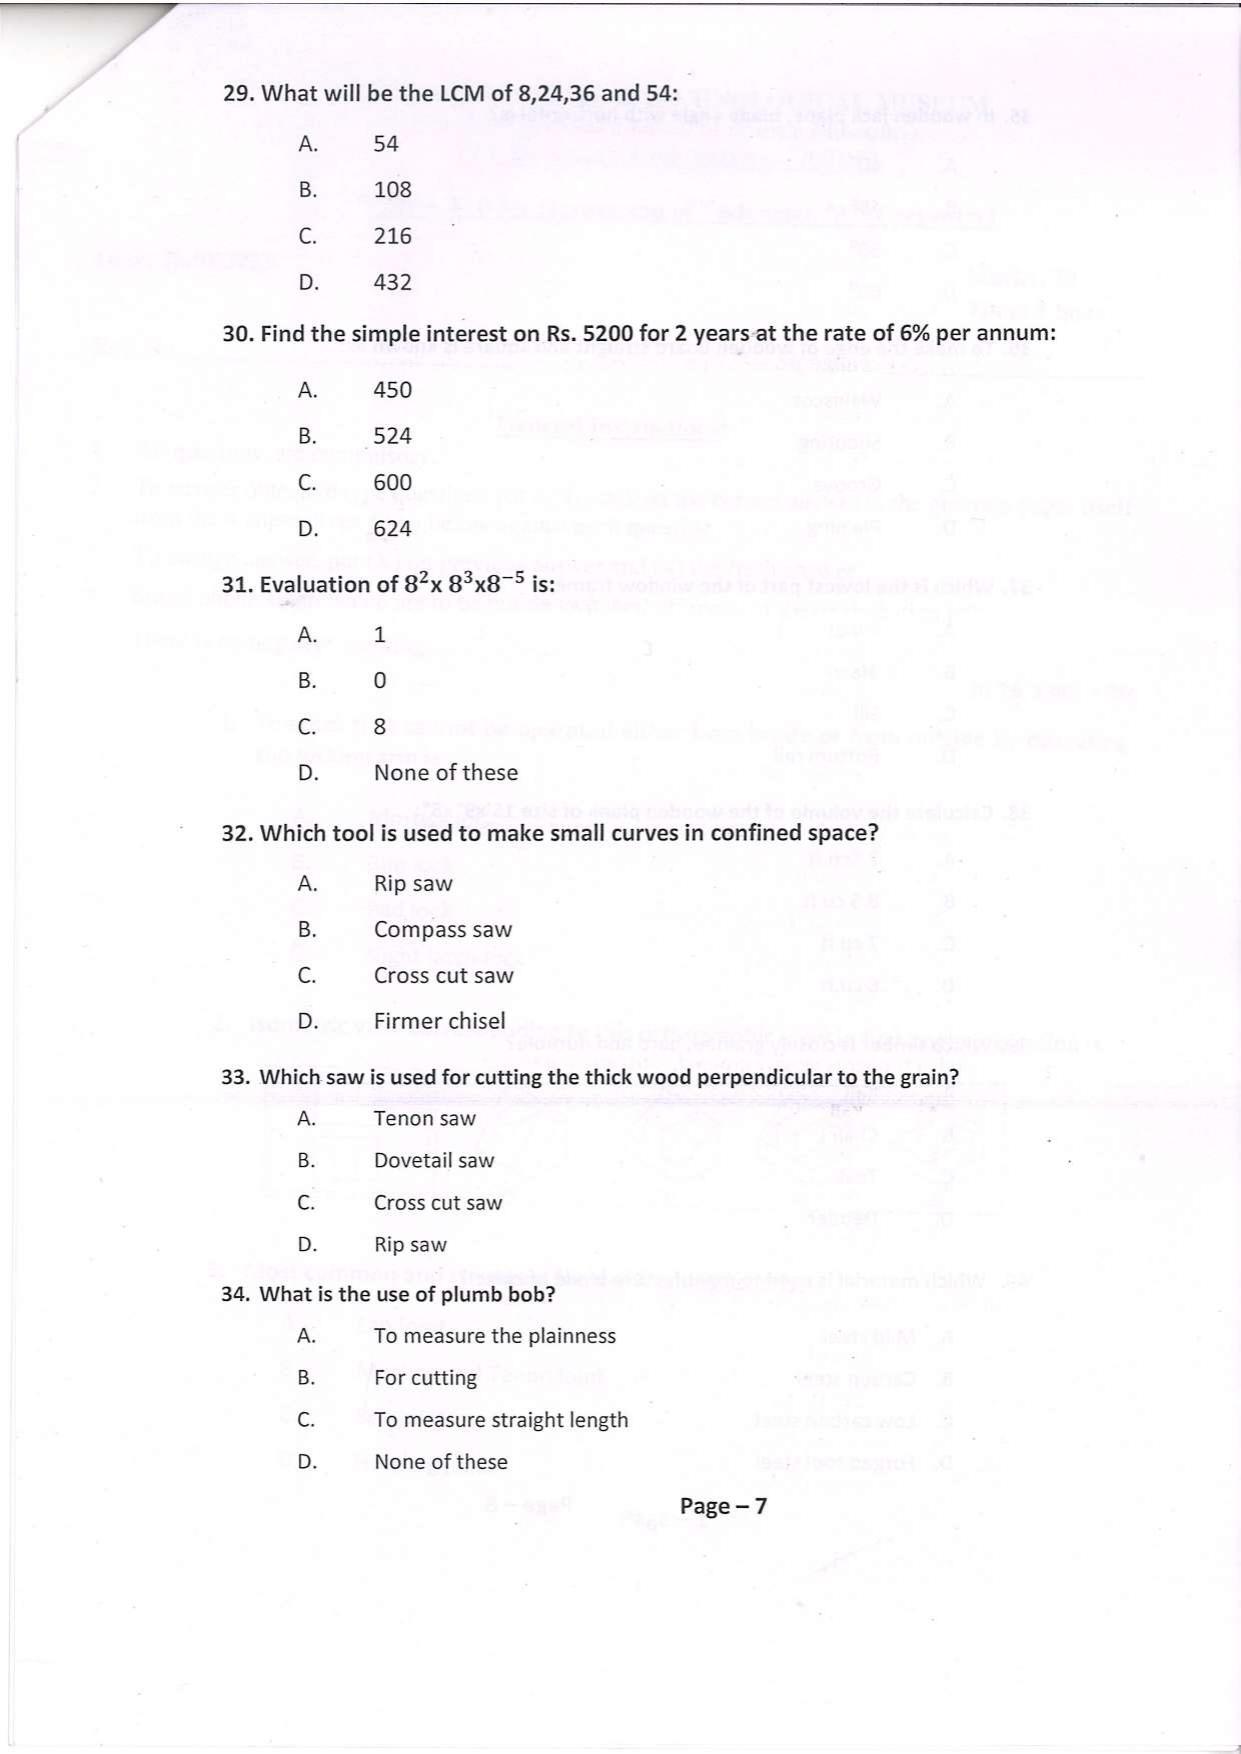 Question Paper of Technician ‘A’ (Carpentry) at BITM, Kolkata (Advertisement No. 4/2022) - Page 7